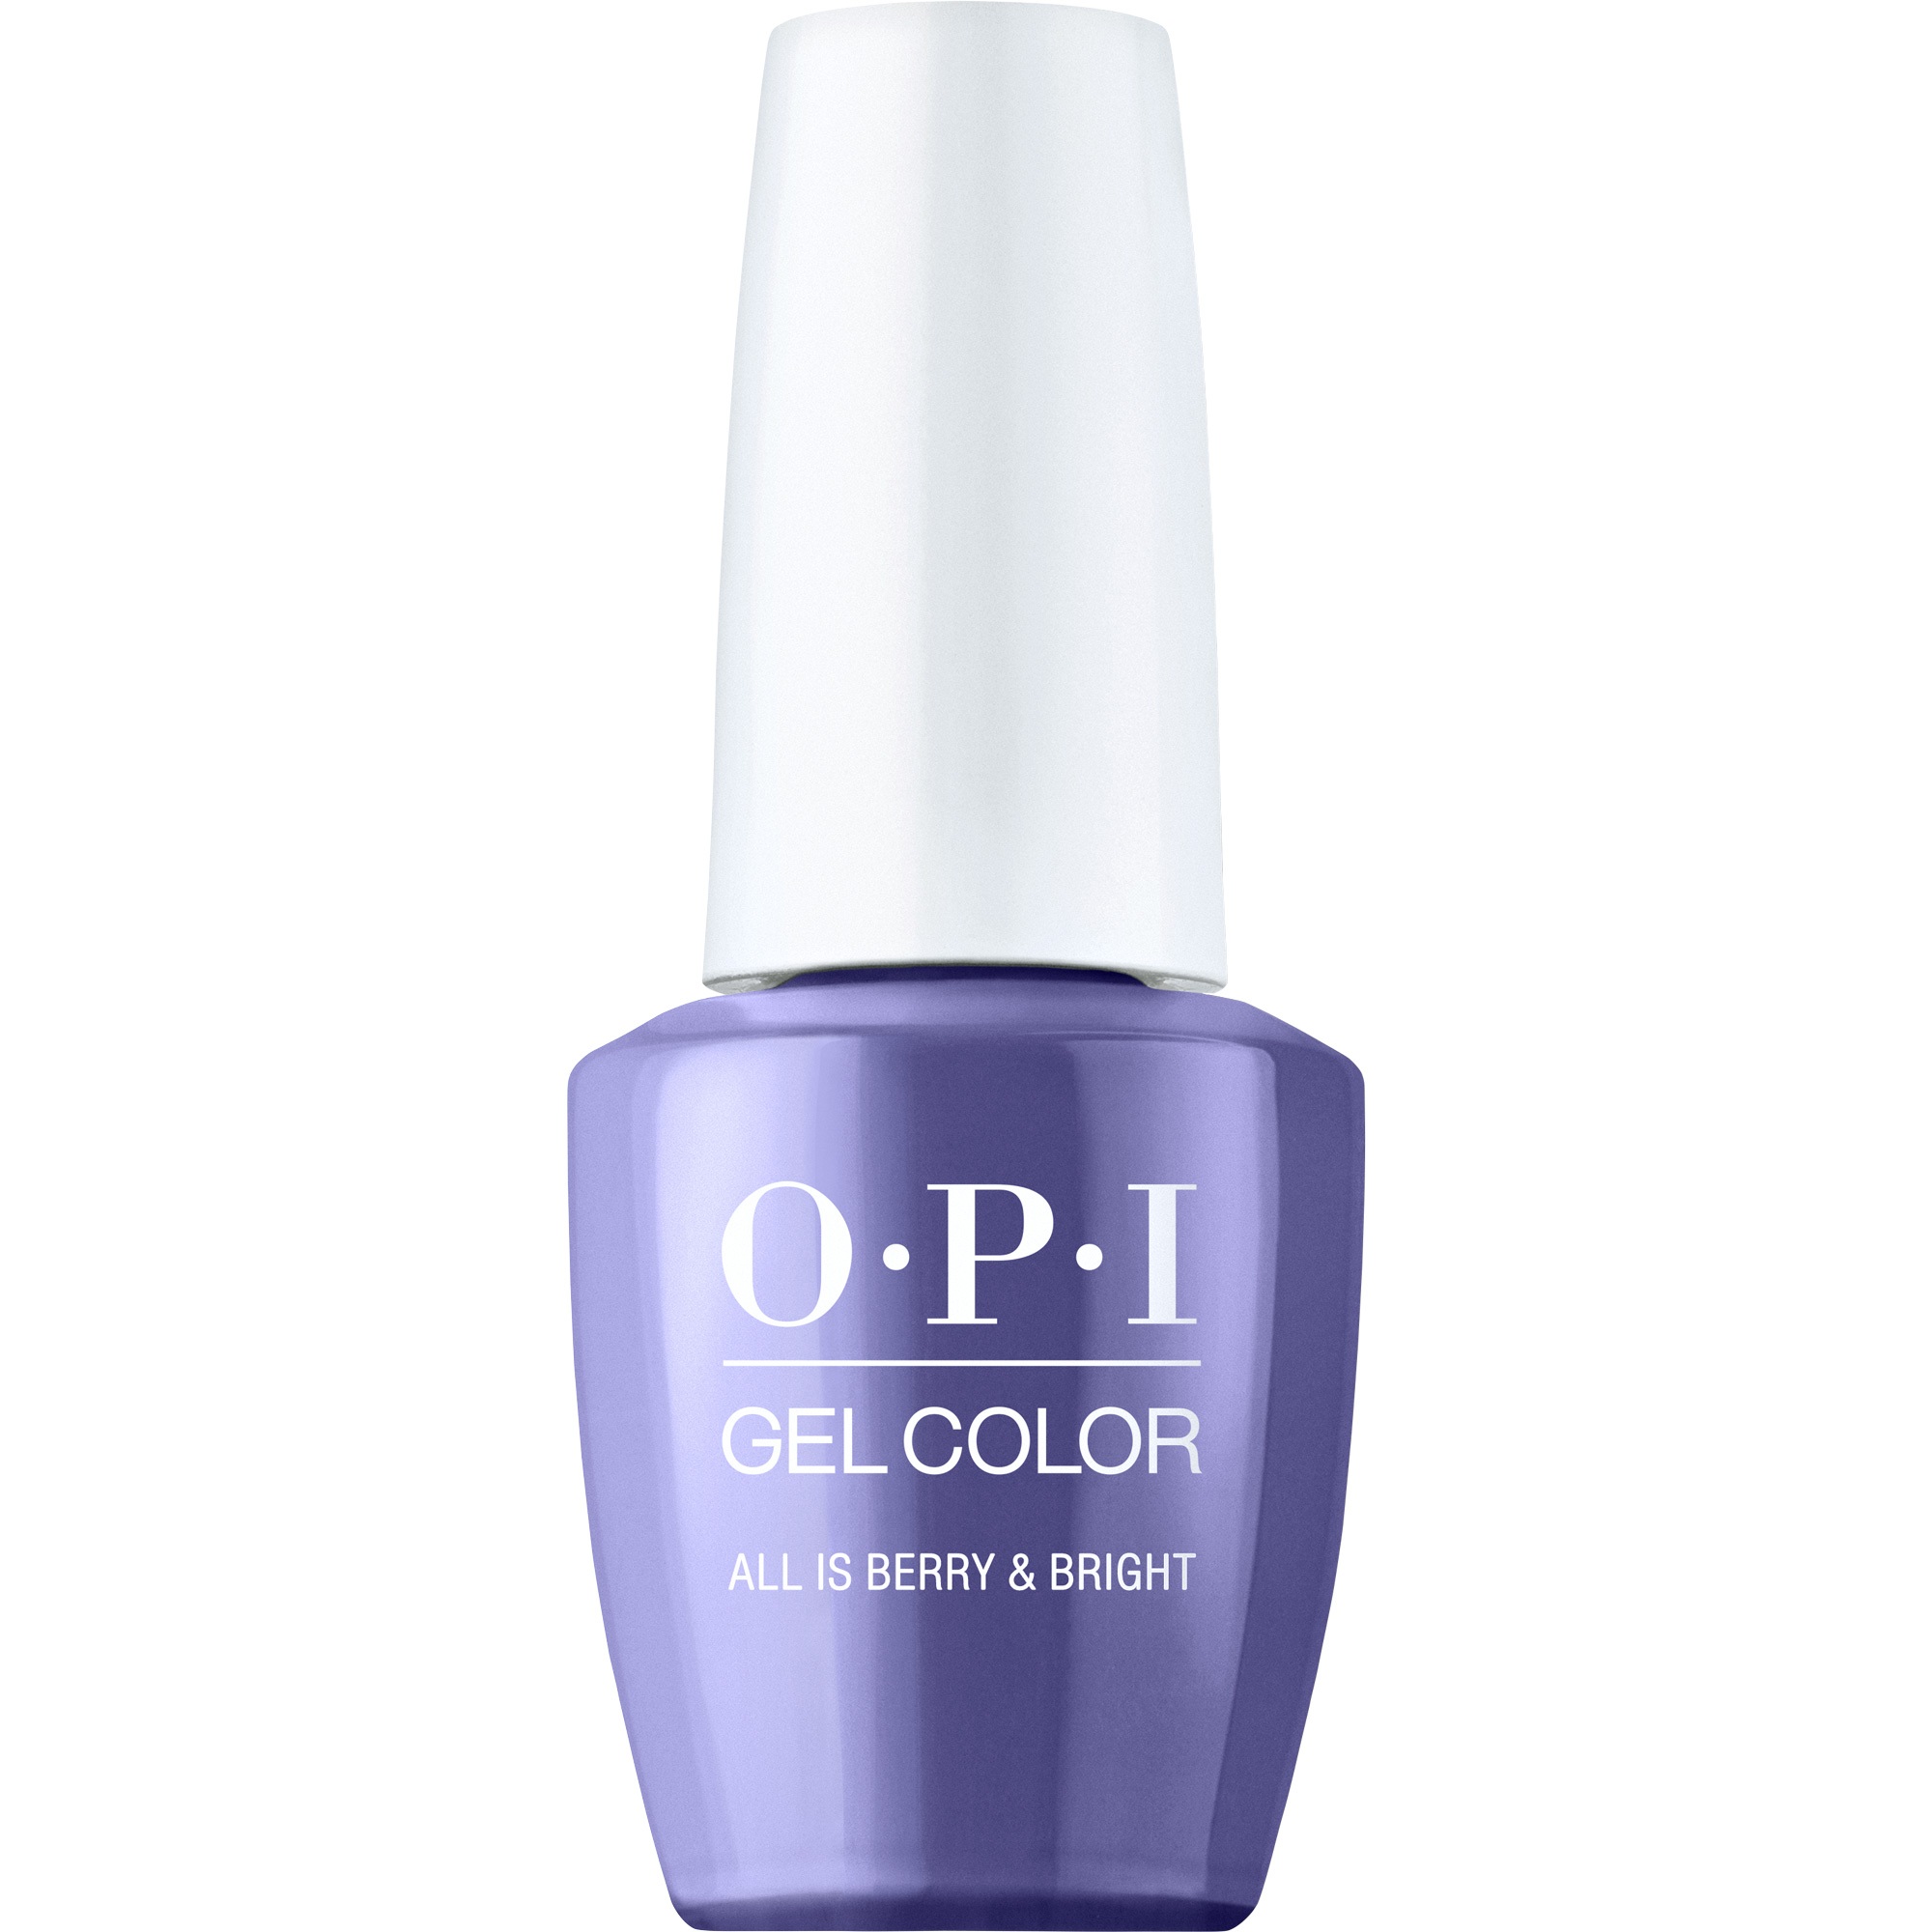 OPI Gel Color 360 - All is Berry & Bright